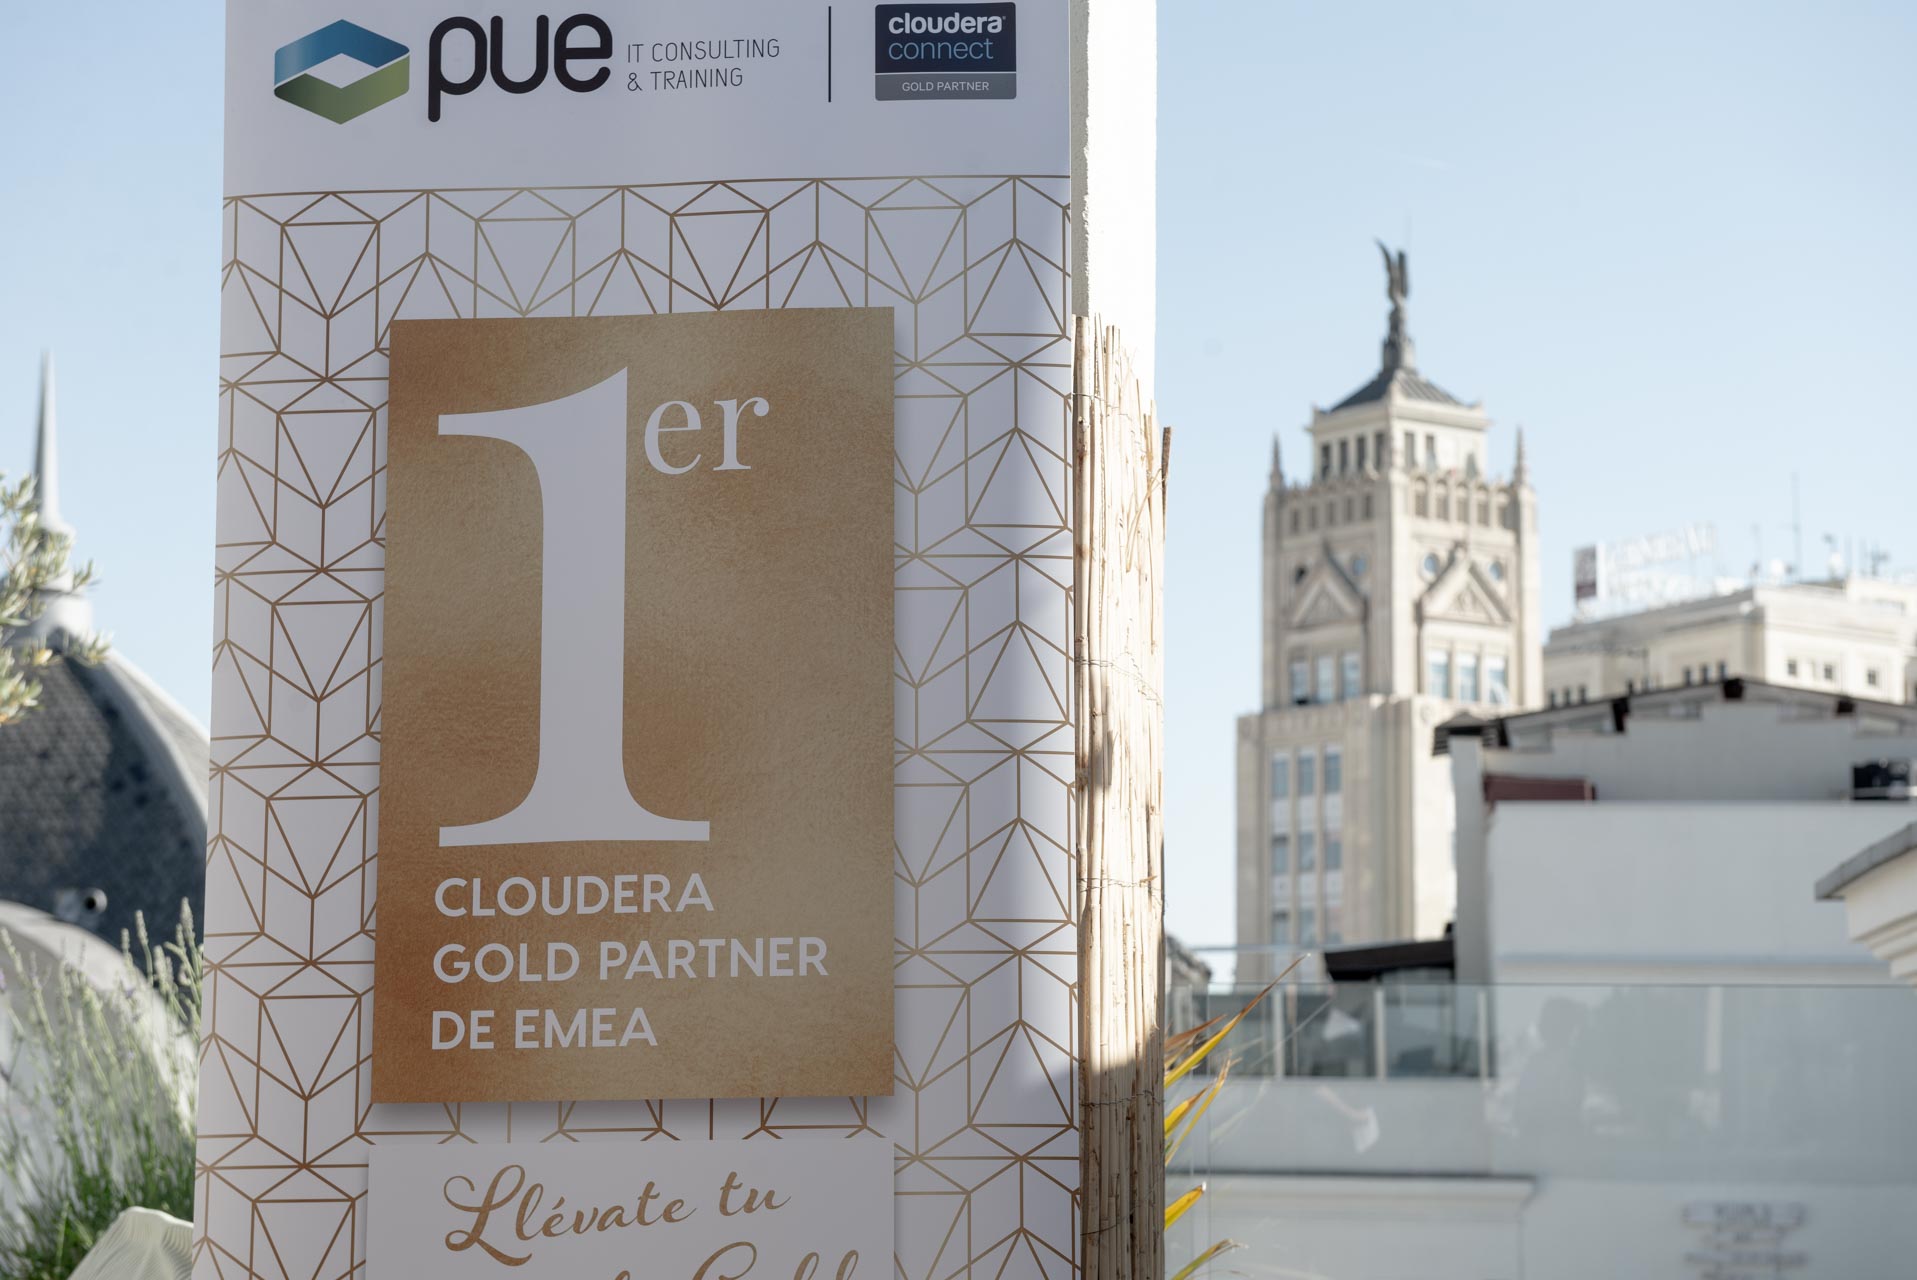 PUE celebration as the first worldwide Cloudera’s Gold Partner